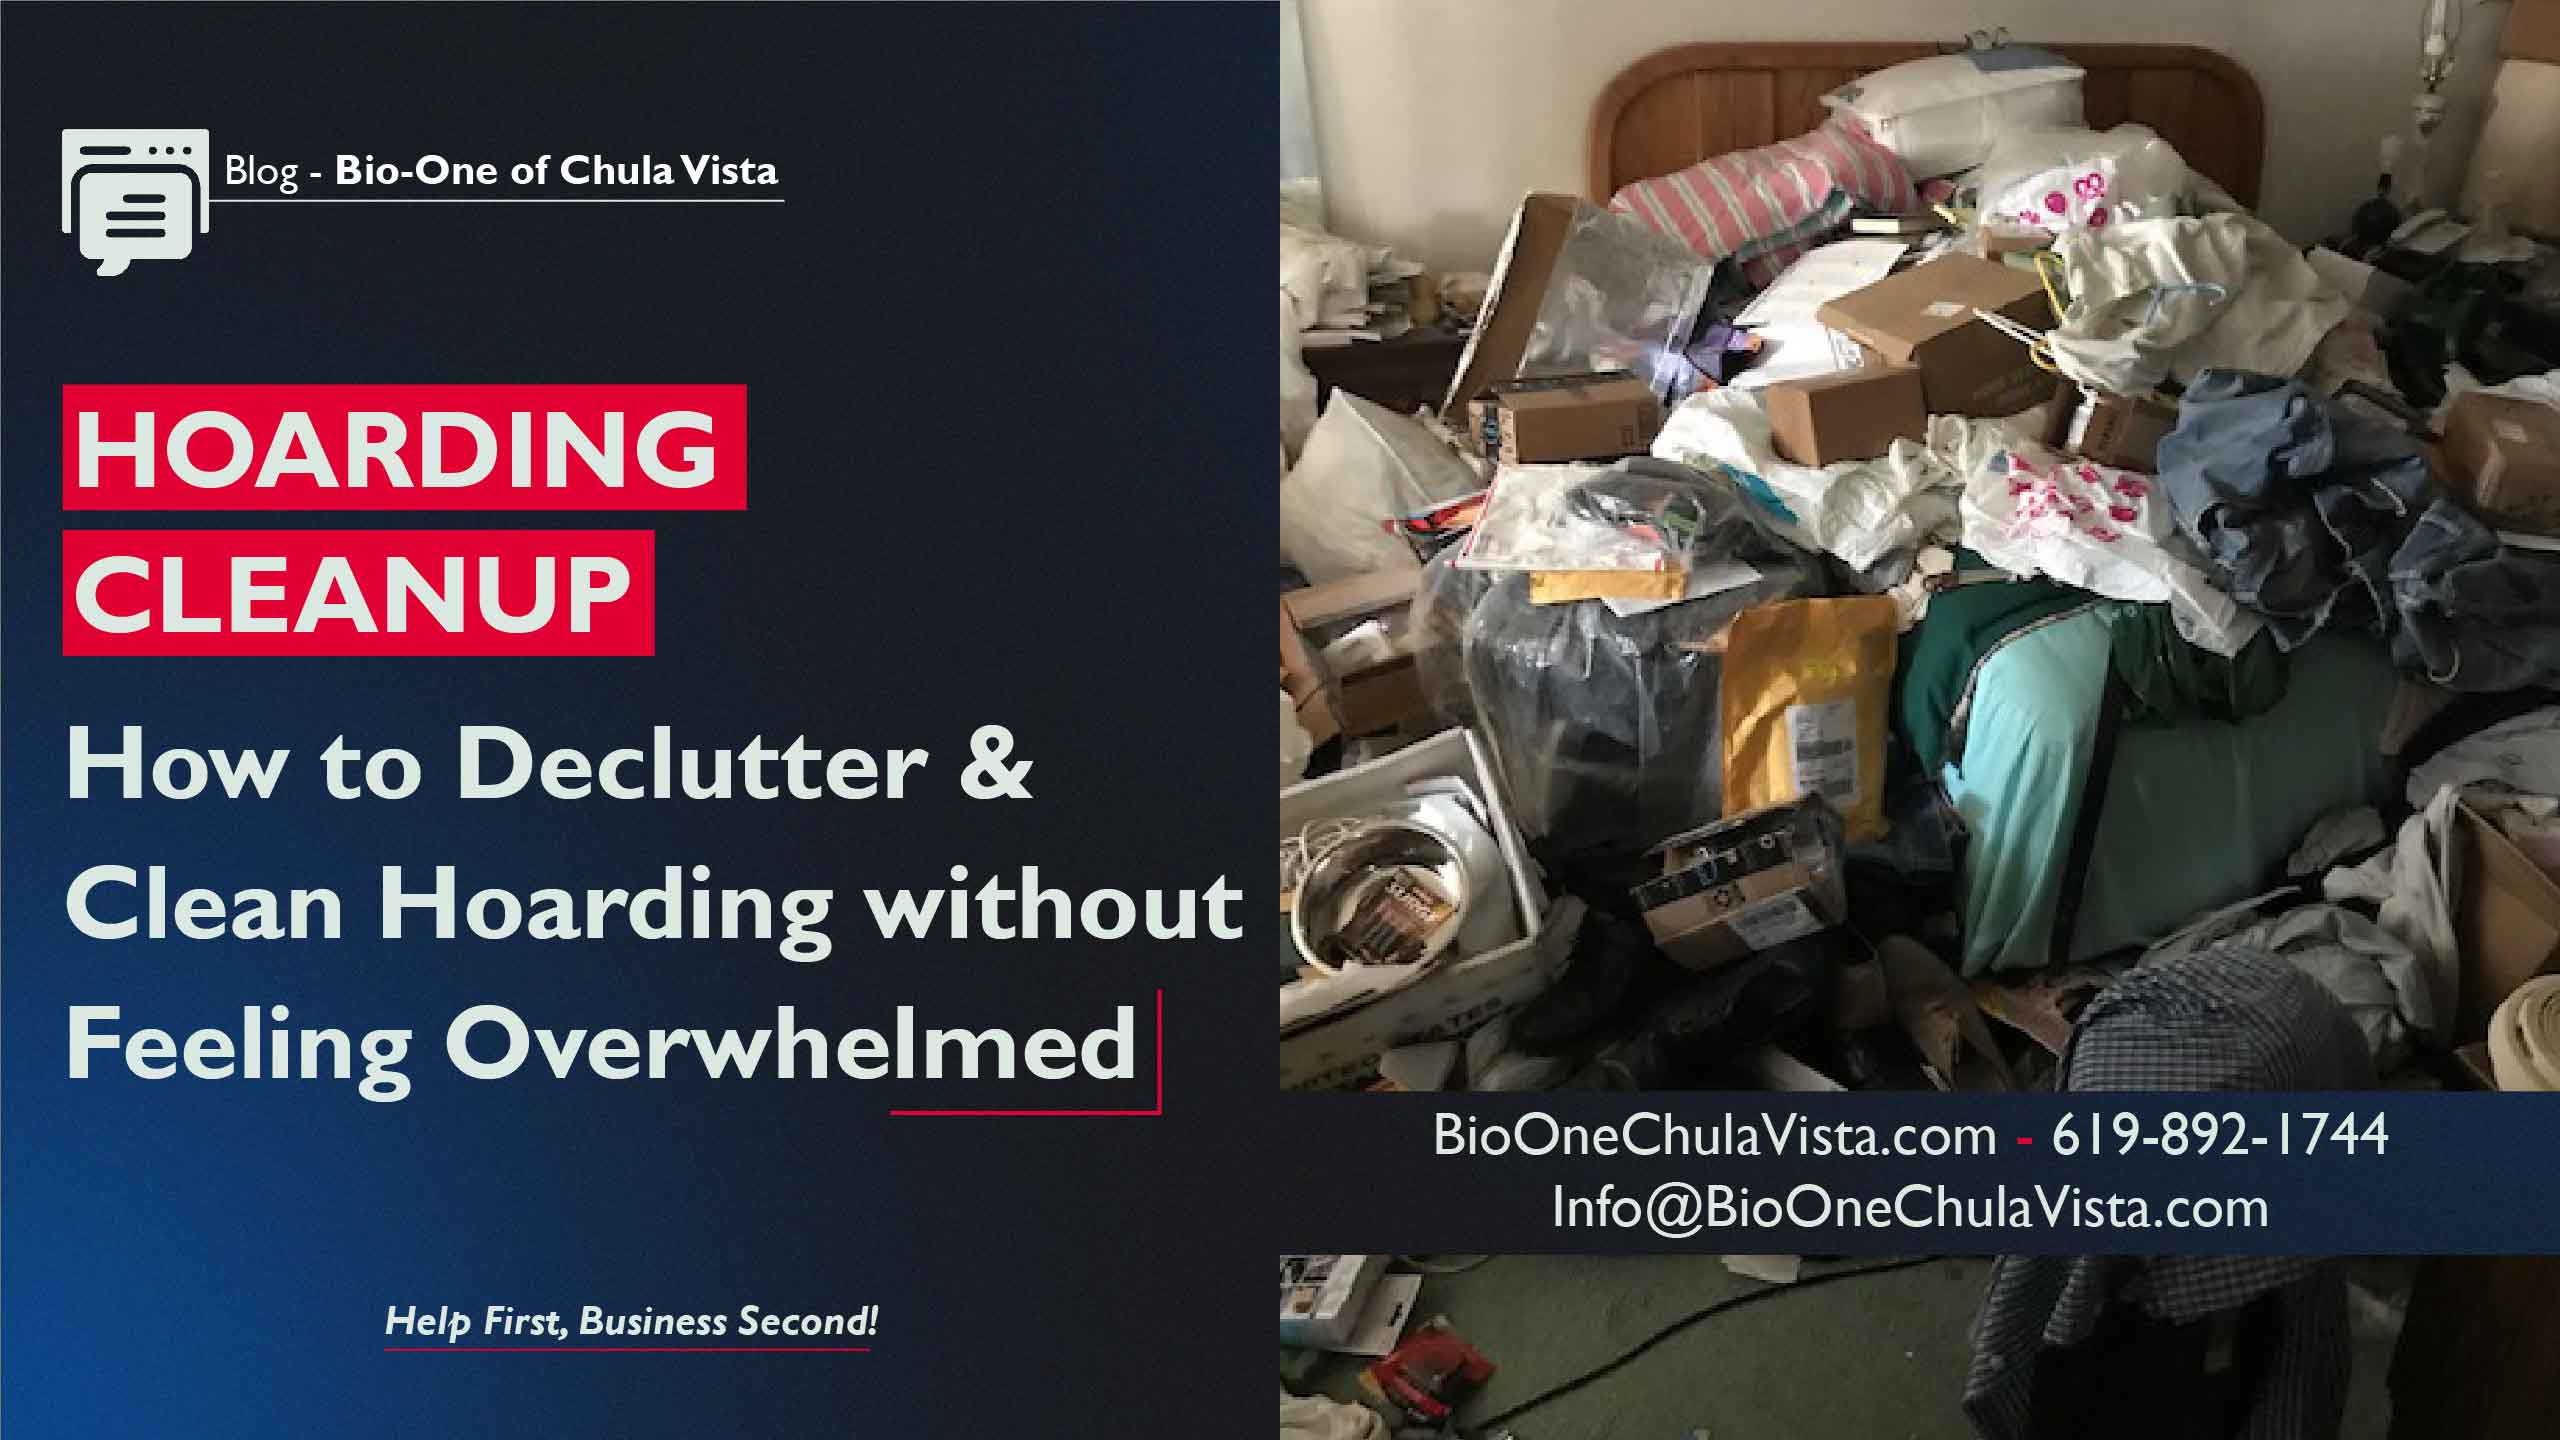 Bio-One CV - How to Declutter & Clean Hoarding without Feeling Overwhelmed